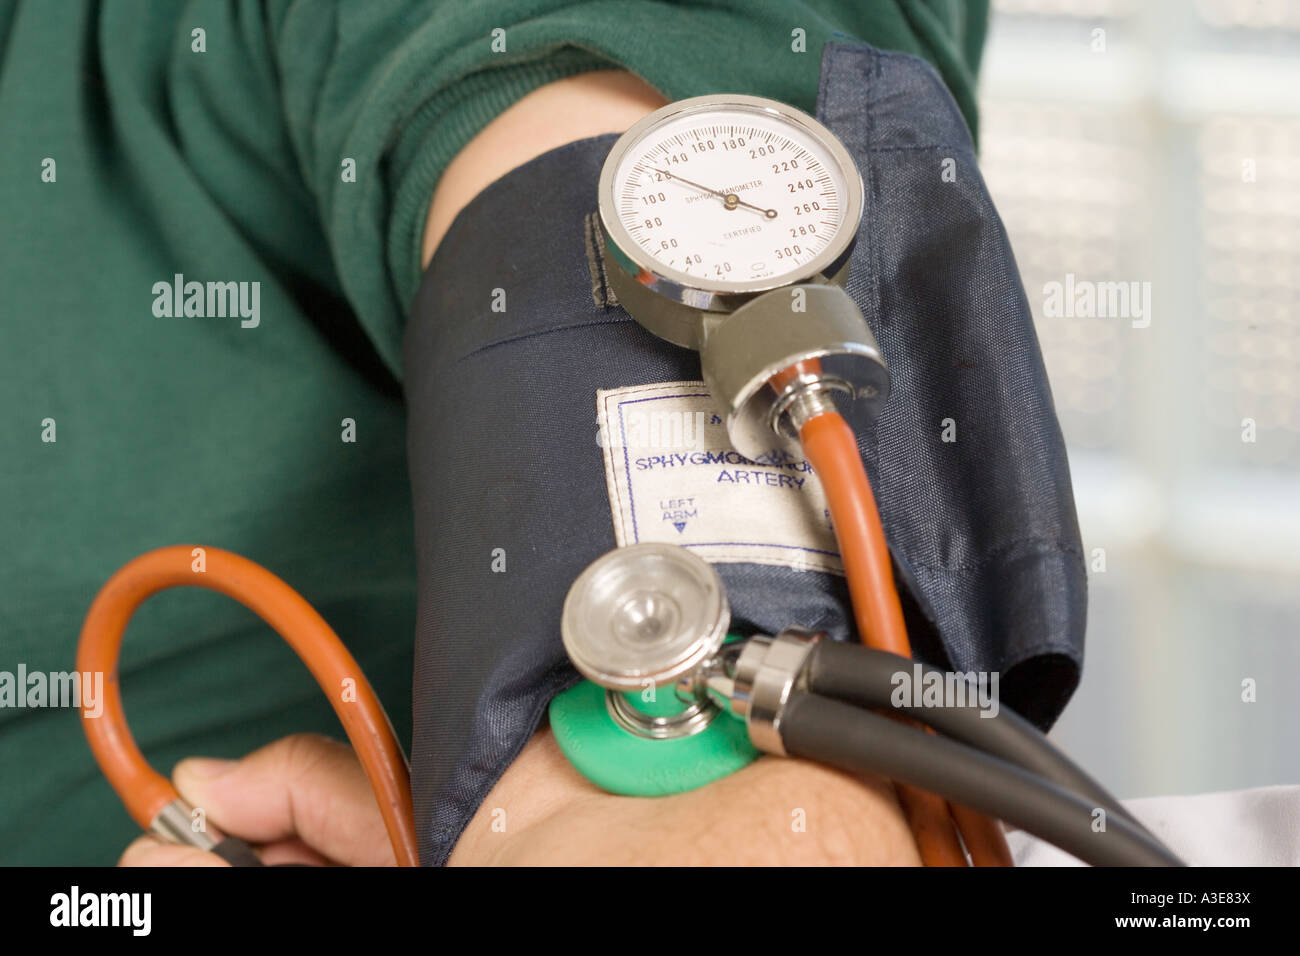 Blood Pressure dial (Sphygmometer) on patients cuff during a blood pressure exam. Stock Photo